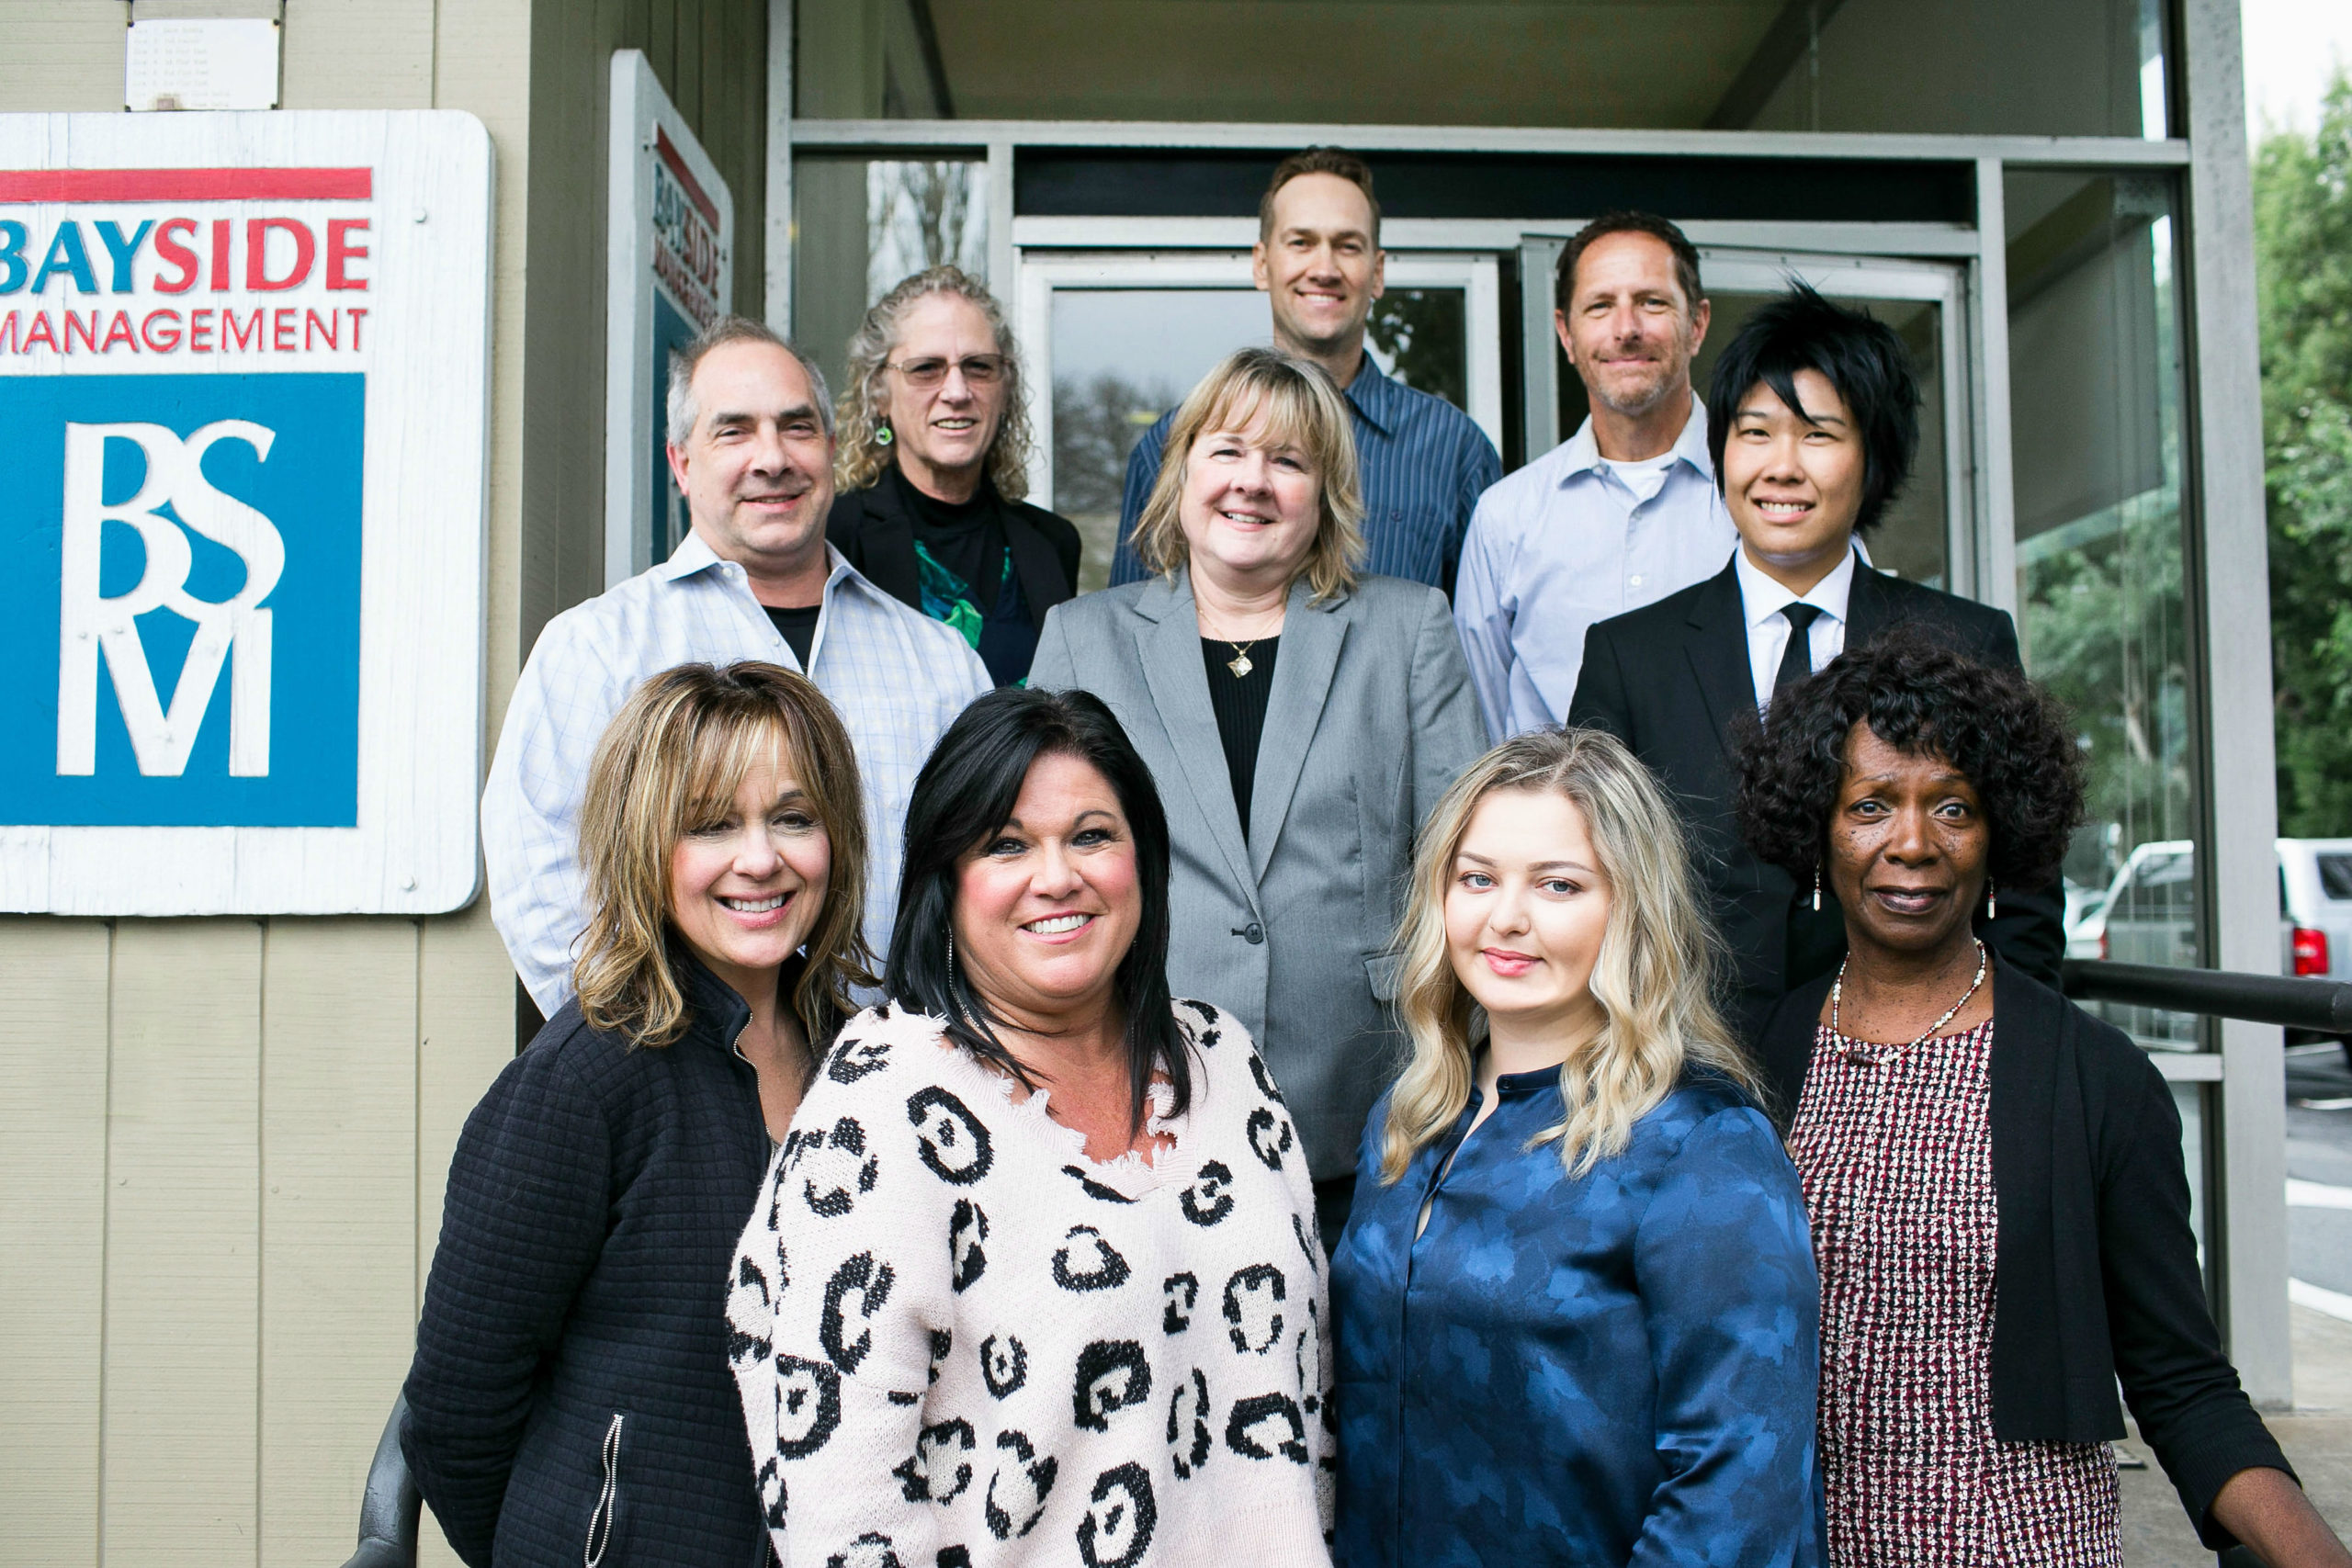 The Bayside Management team on the office front steps in front of the Bayside Management sign. Use Bayside Management for property management in San Mateo County.